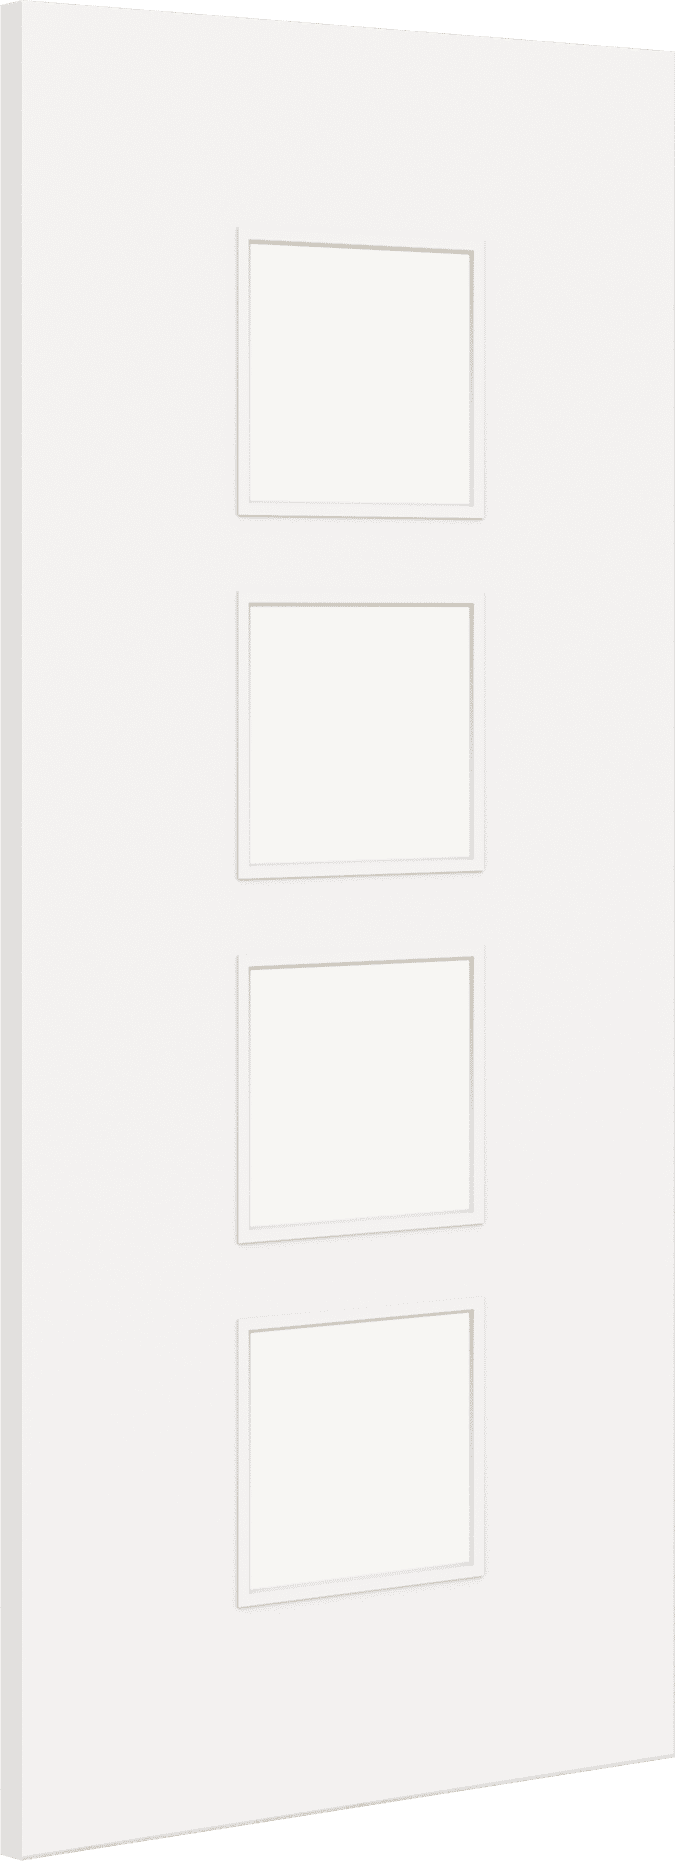 2040mm x 926mm x 44mm Architectural Paint Grade White 09 Clear Glazed Fire Door Blank